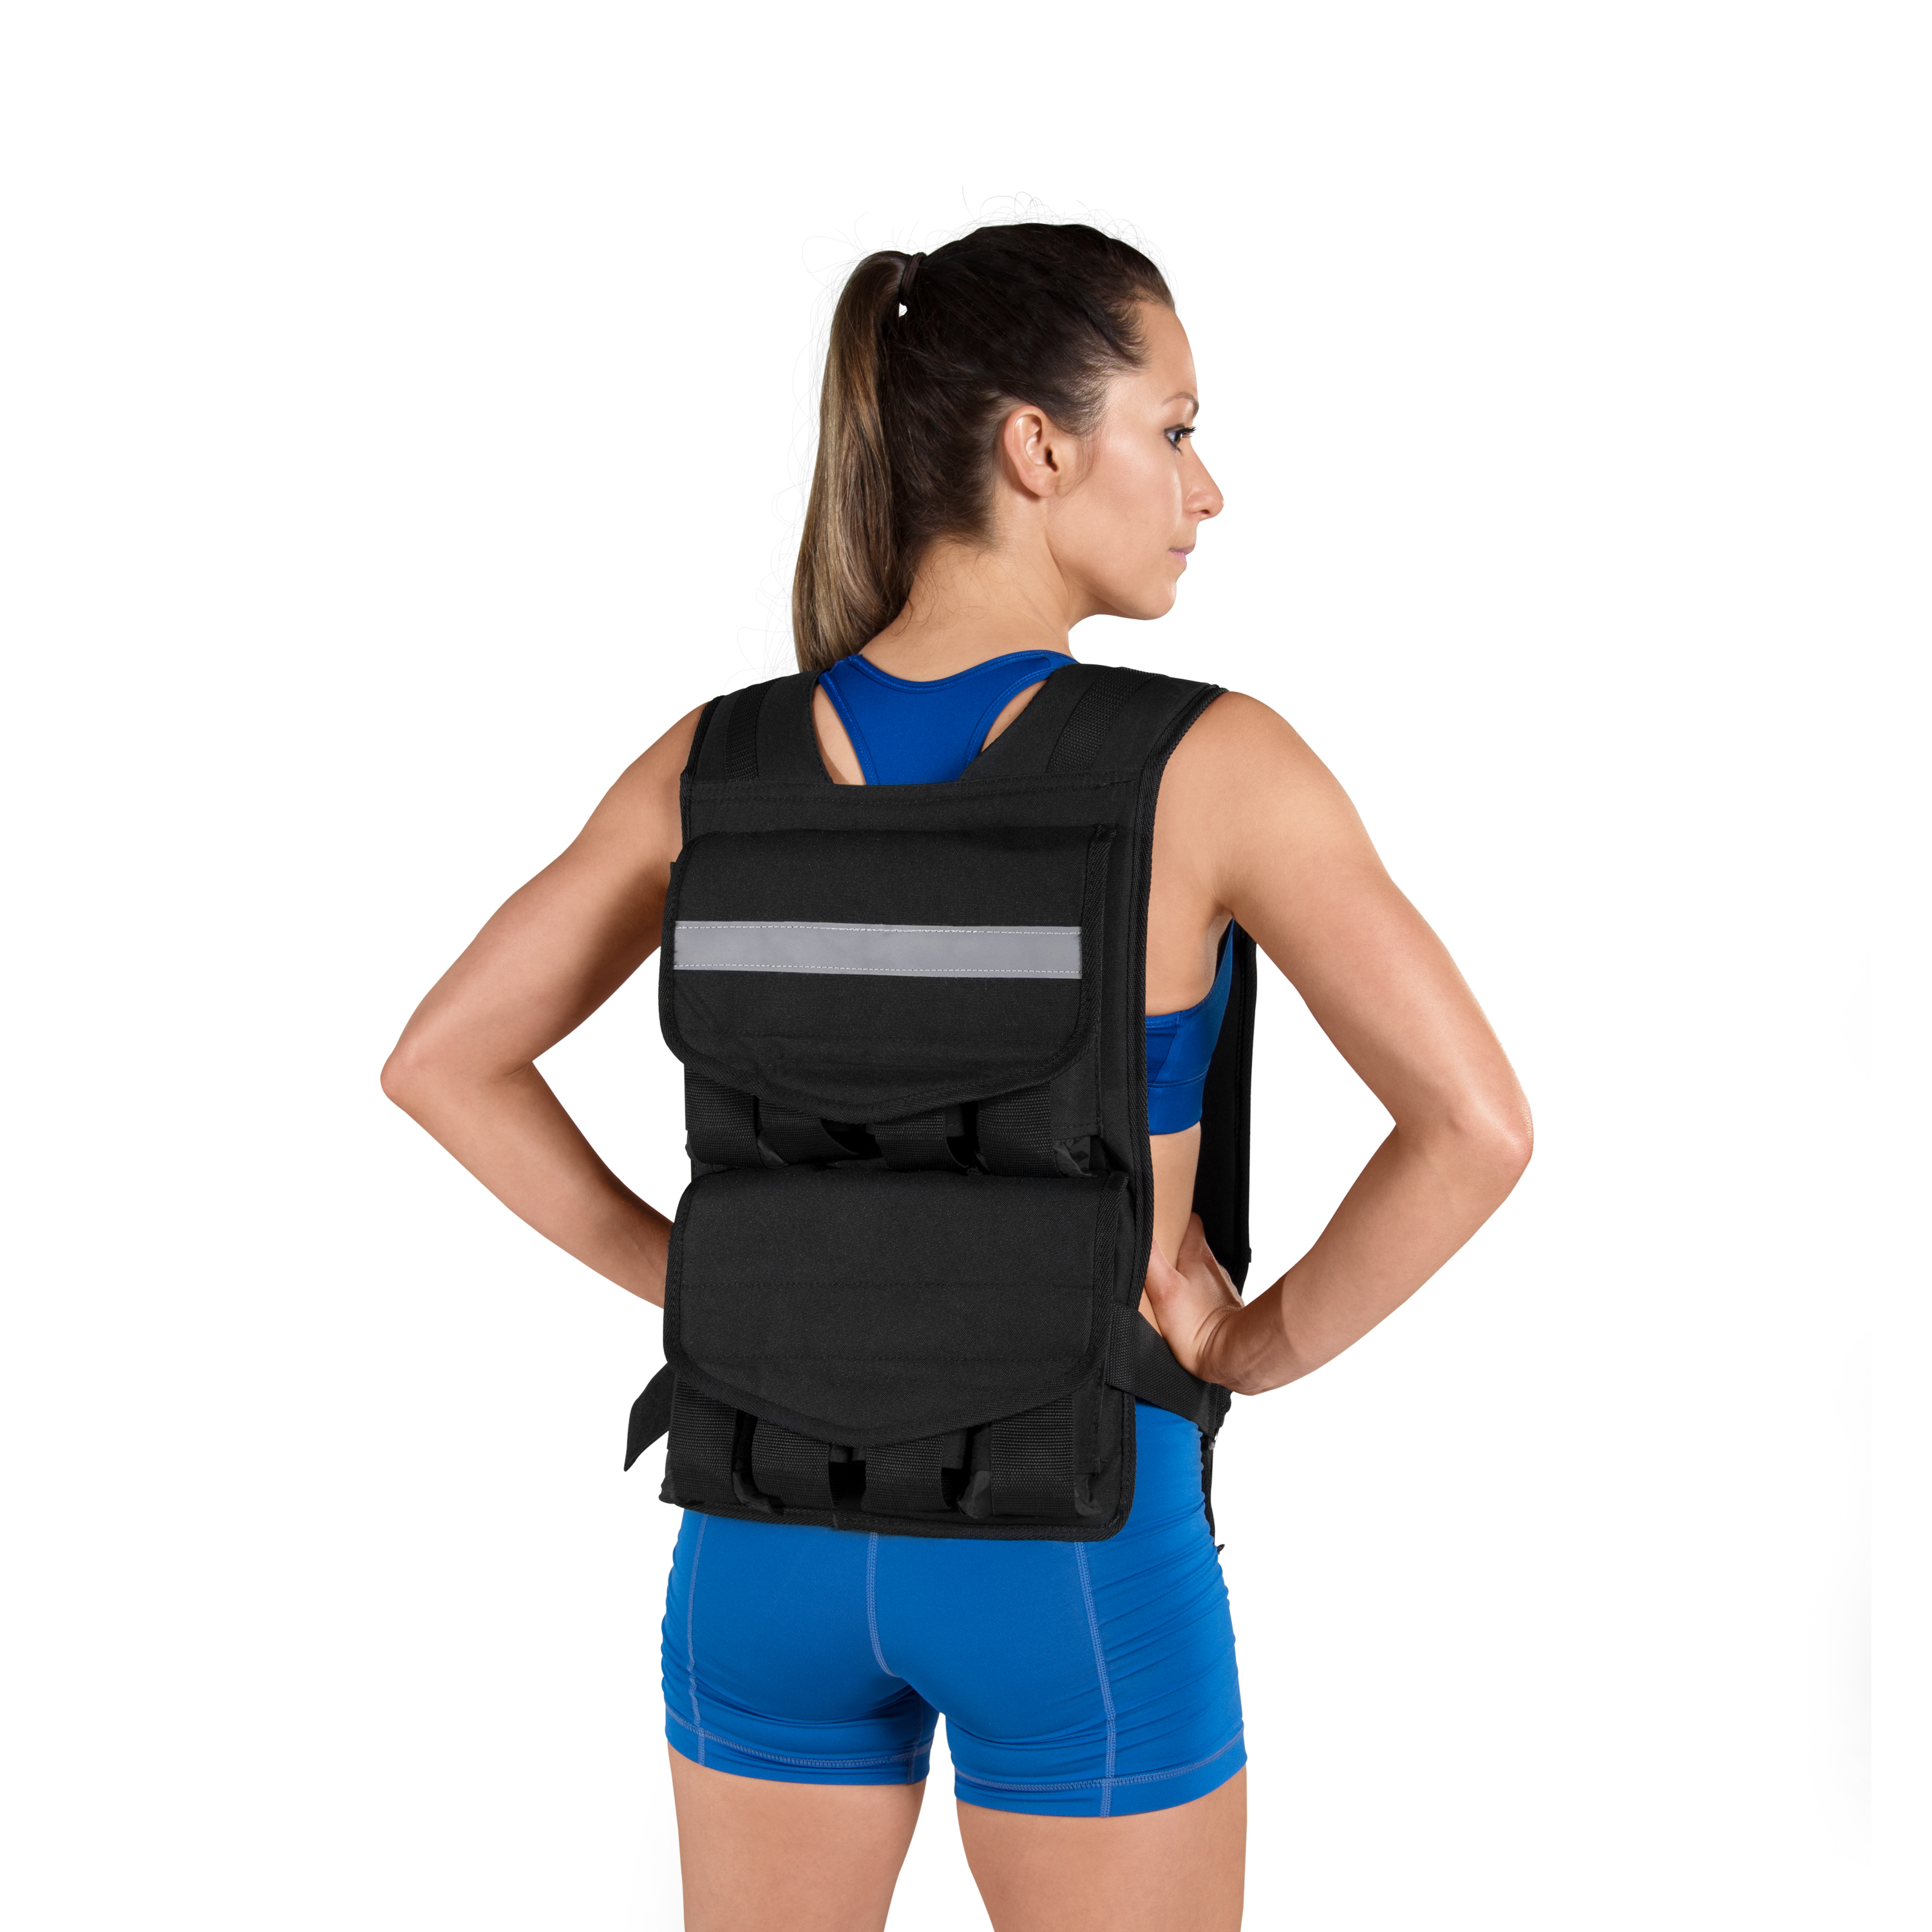 Fuel Pureformance Adjustable Weighted Fitness Vest, 40 Lb. - image 2 of 4